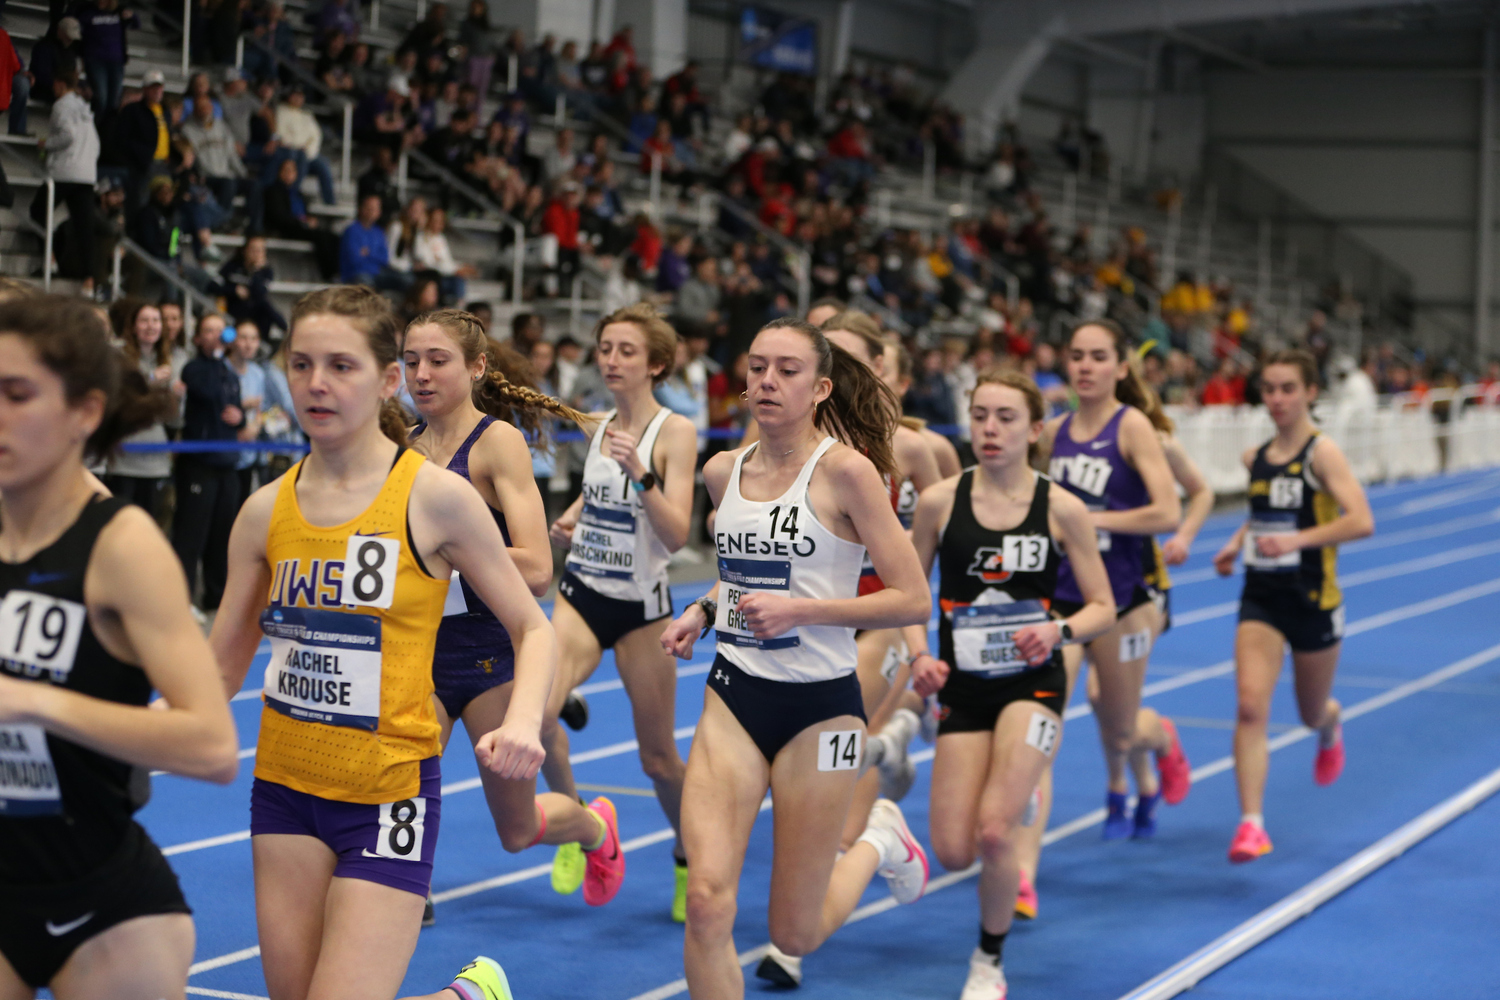 Penelope Greene finished the 5,000-meter race at the NCAA Division III Championships in fifth place earning First Team All-American honors.   D3 PHOTOGRAPHY